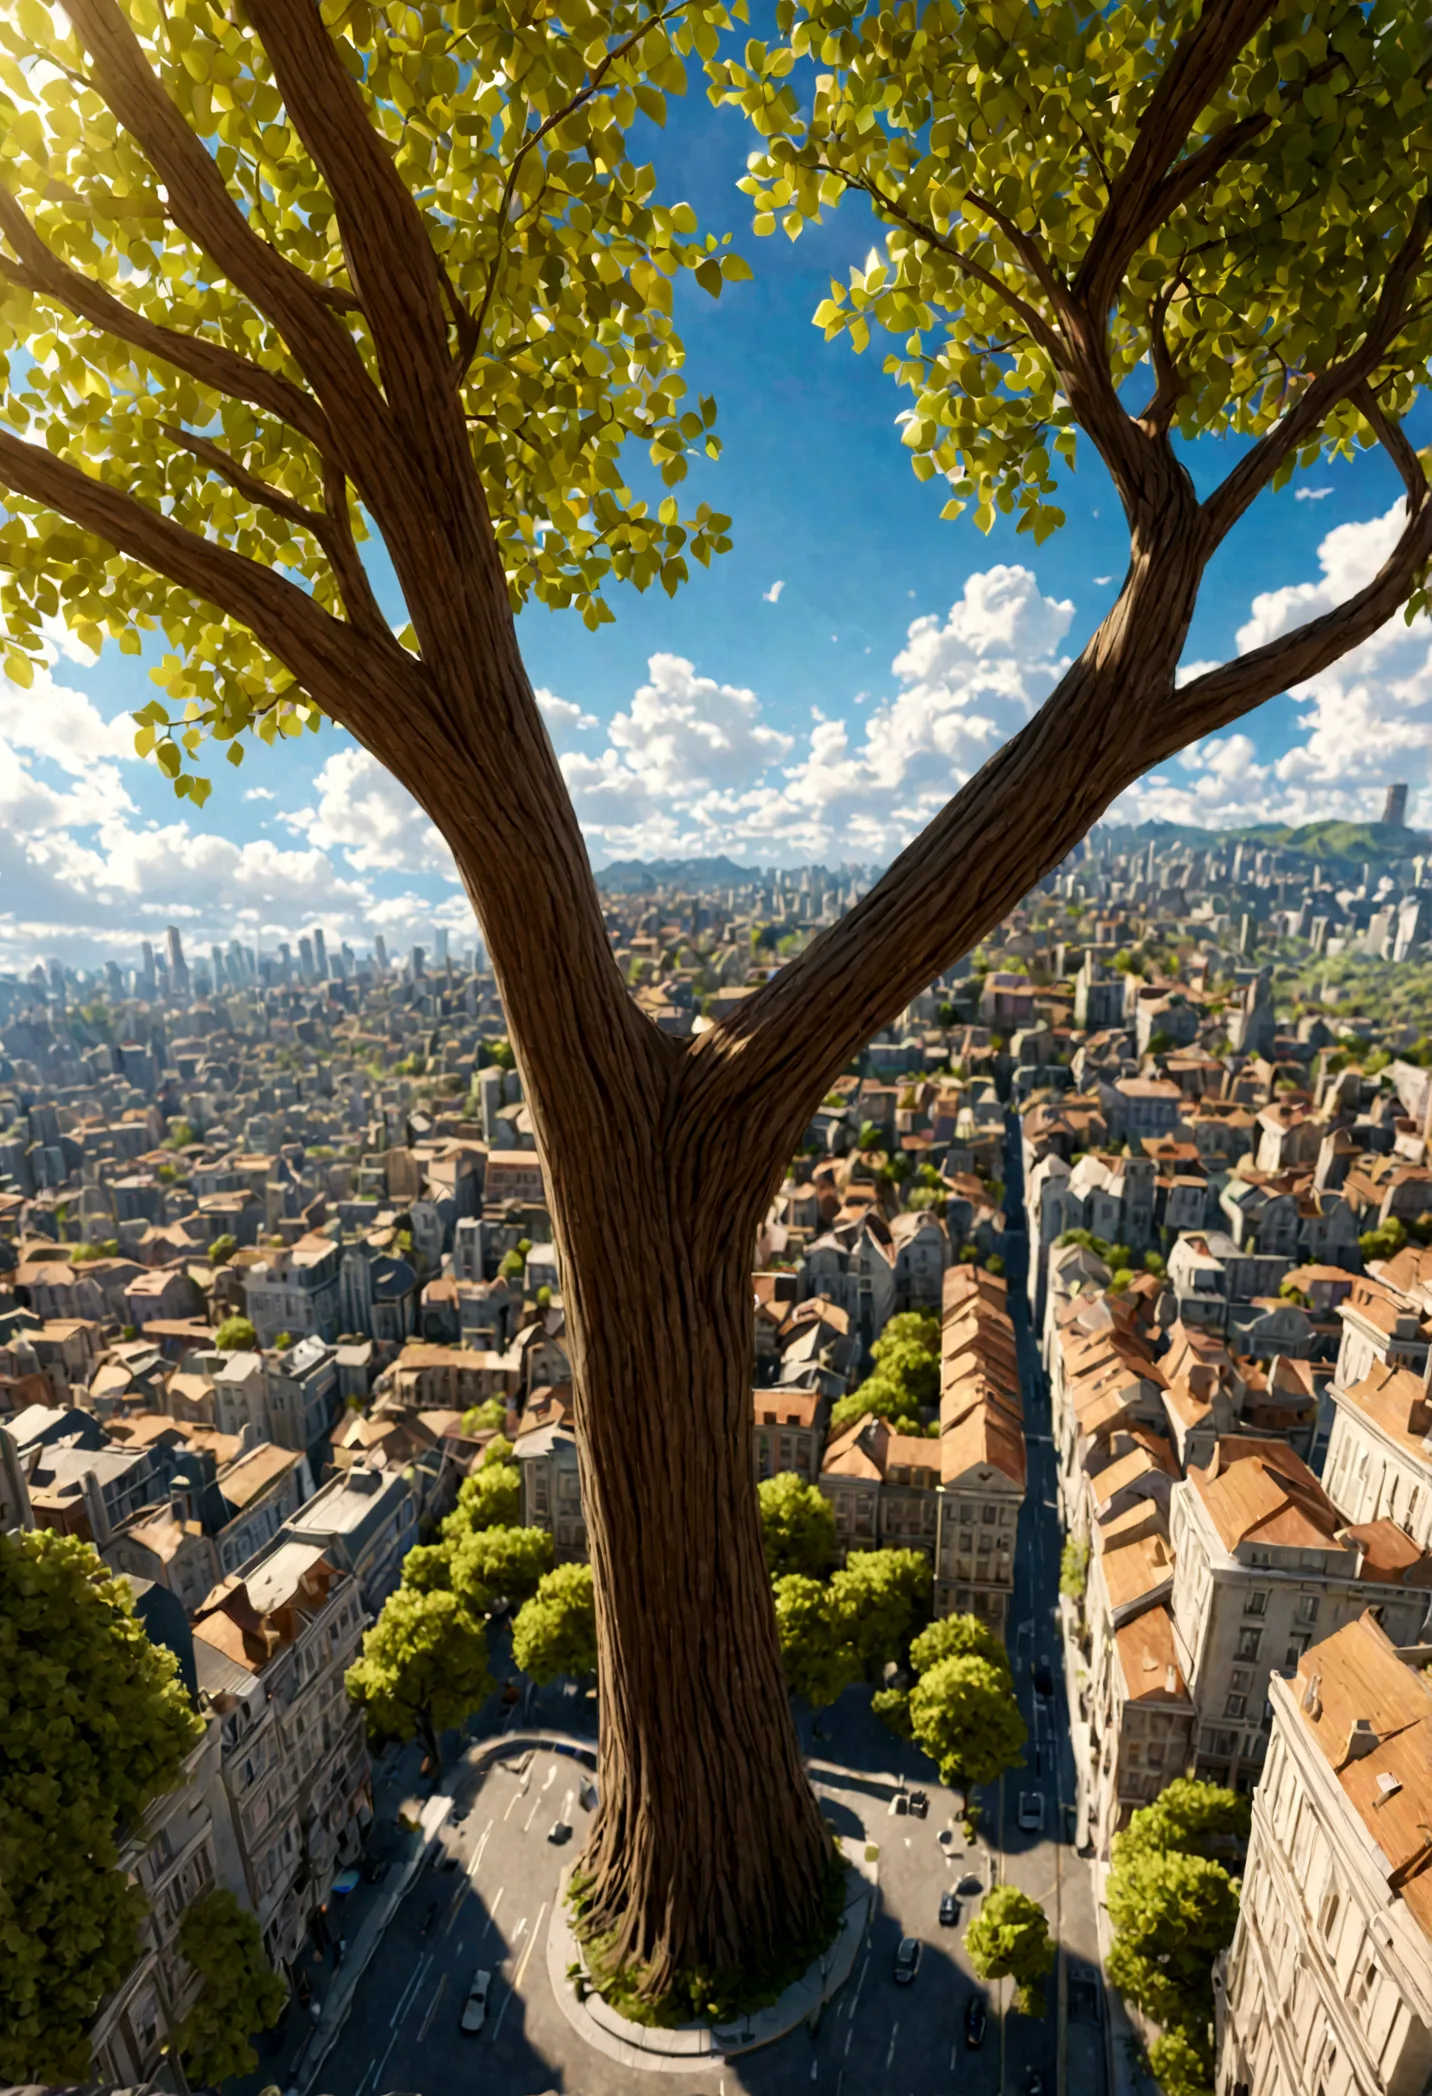 8k, high resolution, super detail, super realistic city in the tree, bright sky, white clouds, miniature